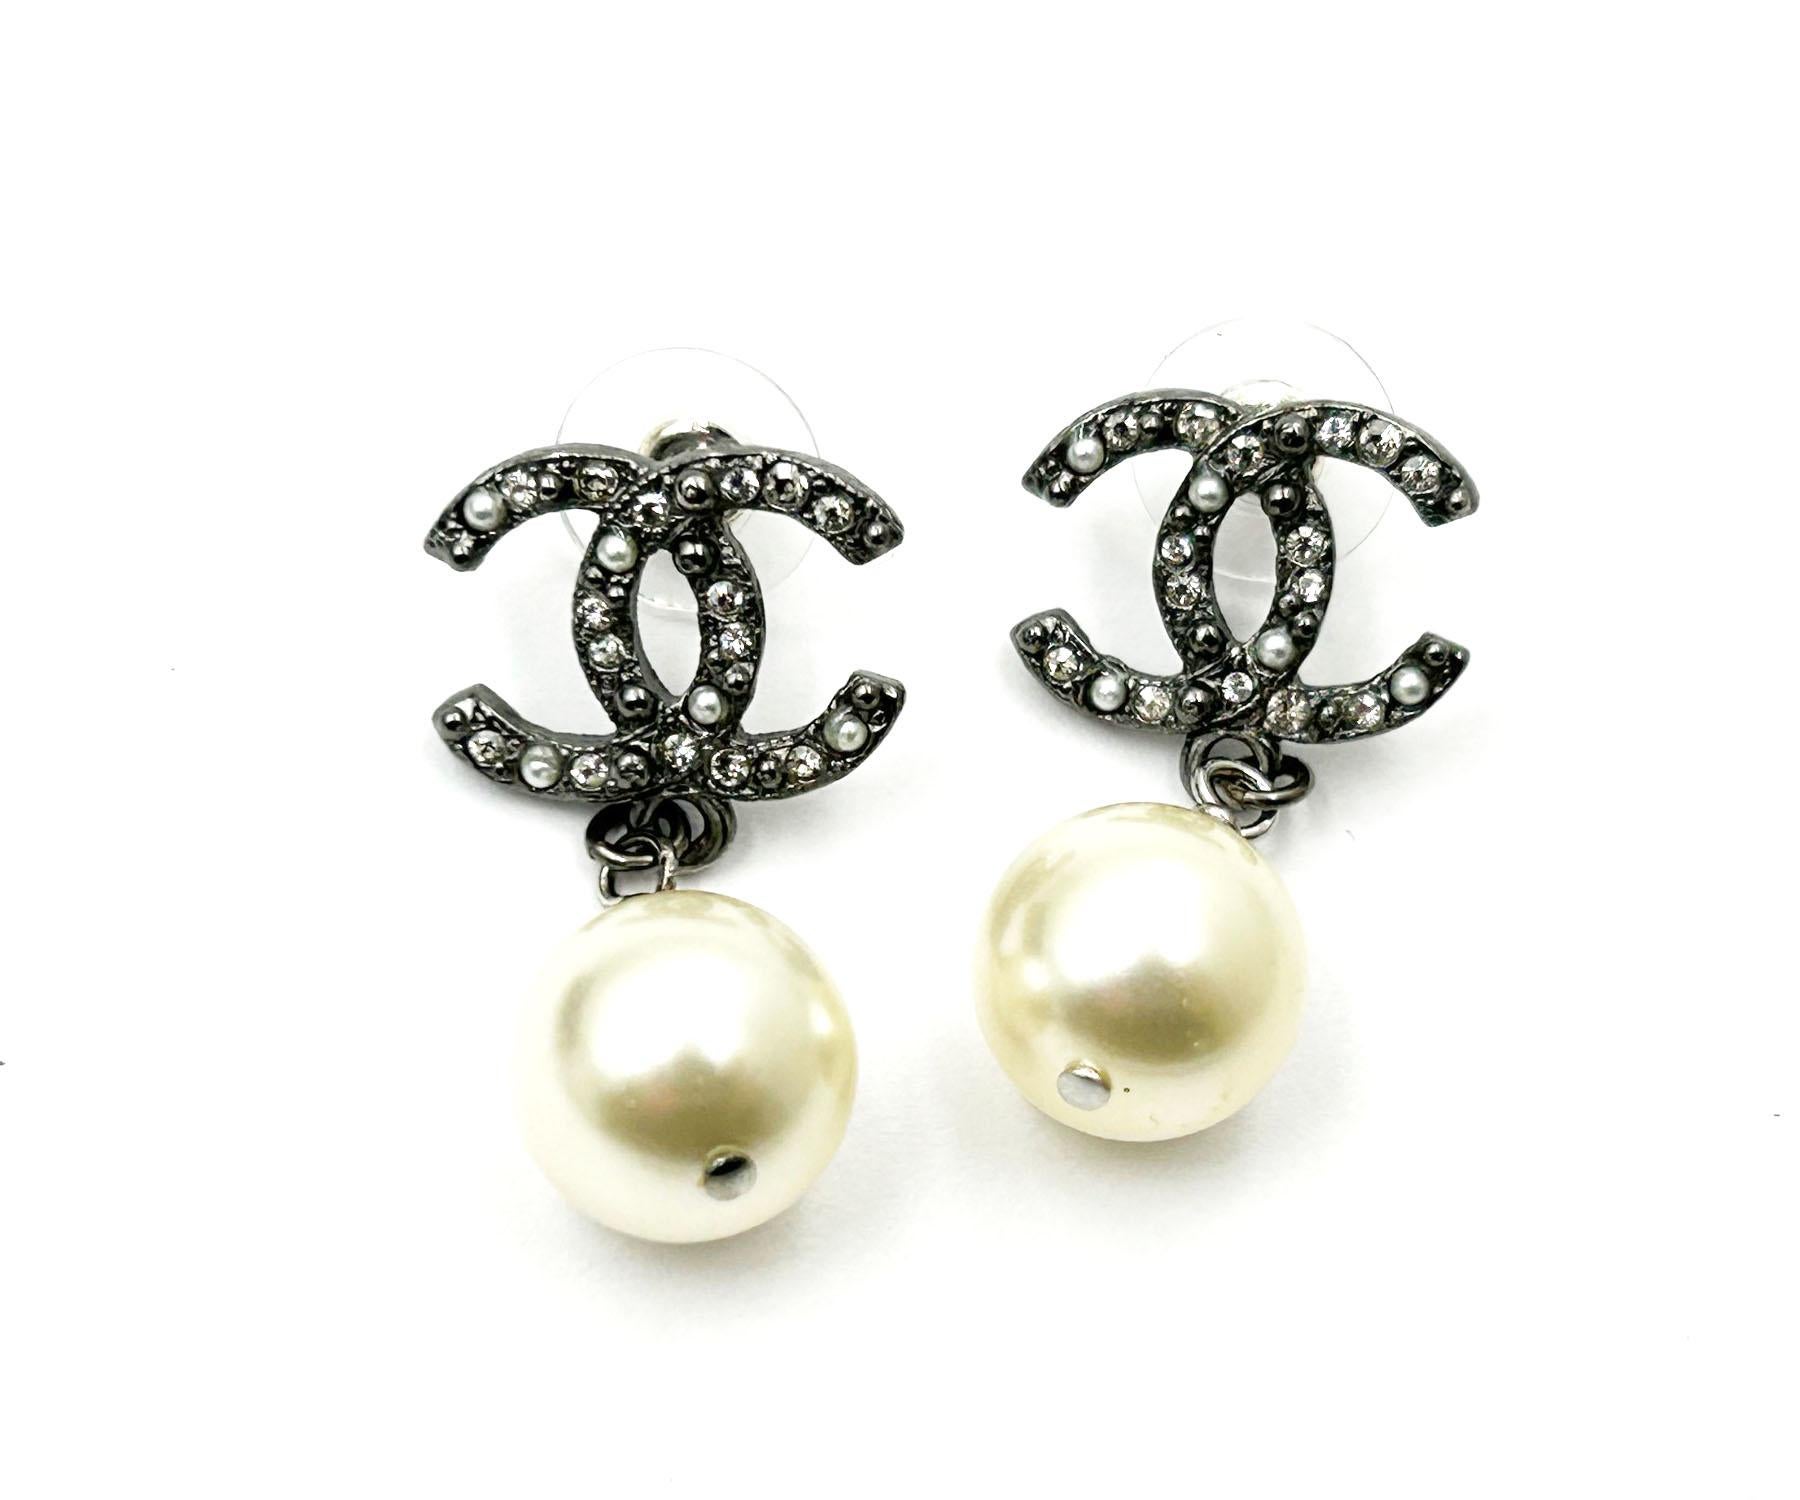 Chanel Classic Gunmetal CC Crystal Faux Pearl Dangle Piercing Earrings In Excellent Condition For Sale In Pasadena, CA